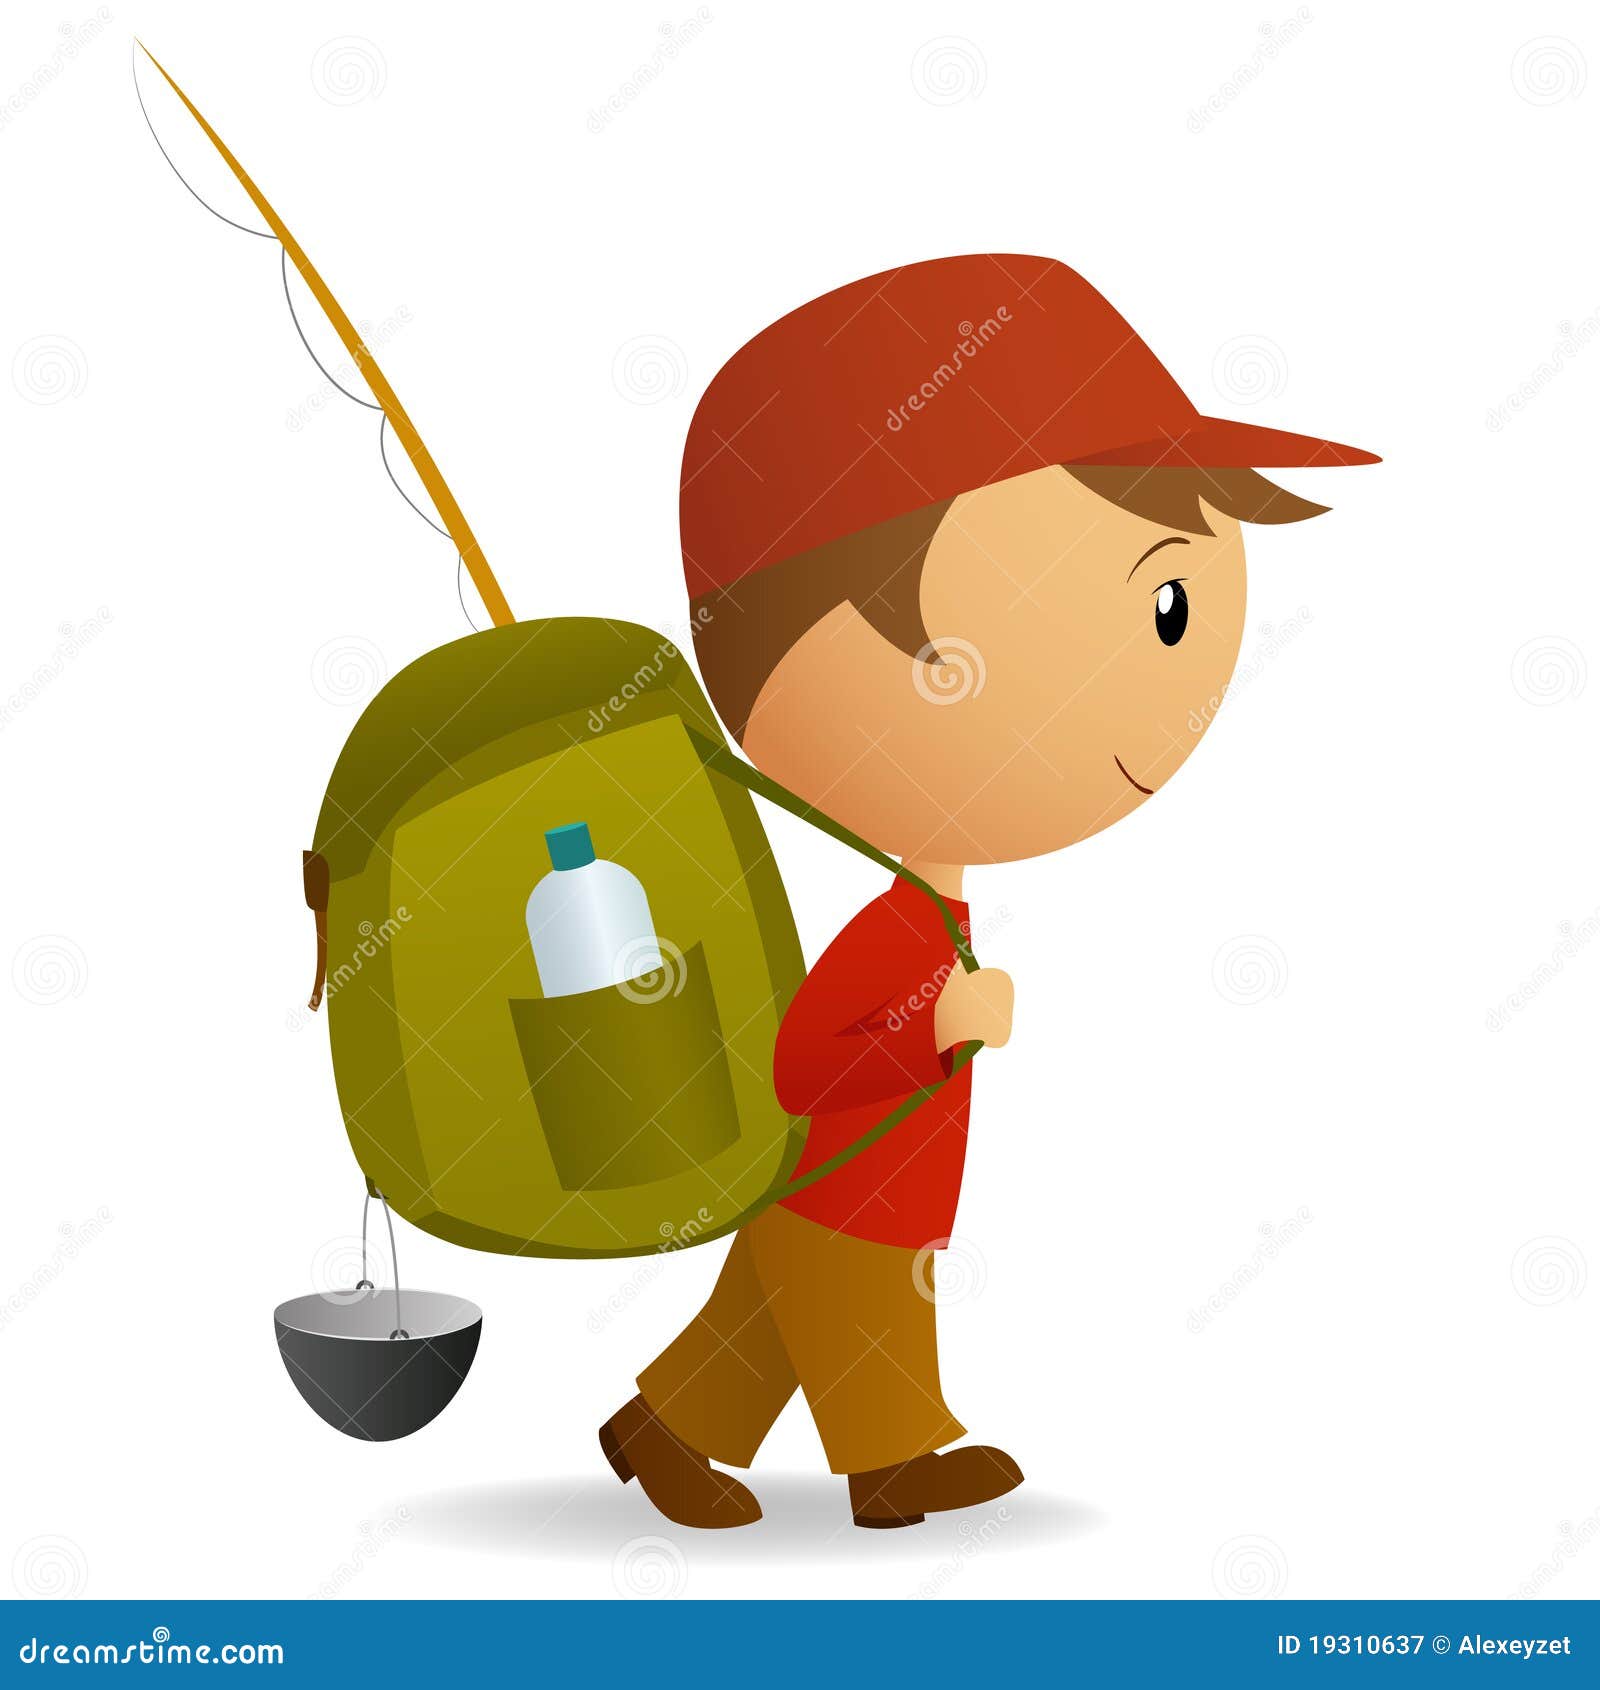 journey clipart free - photo #15